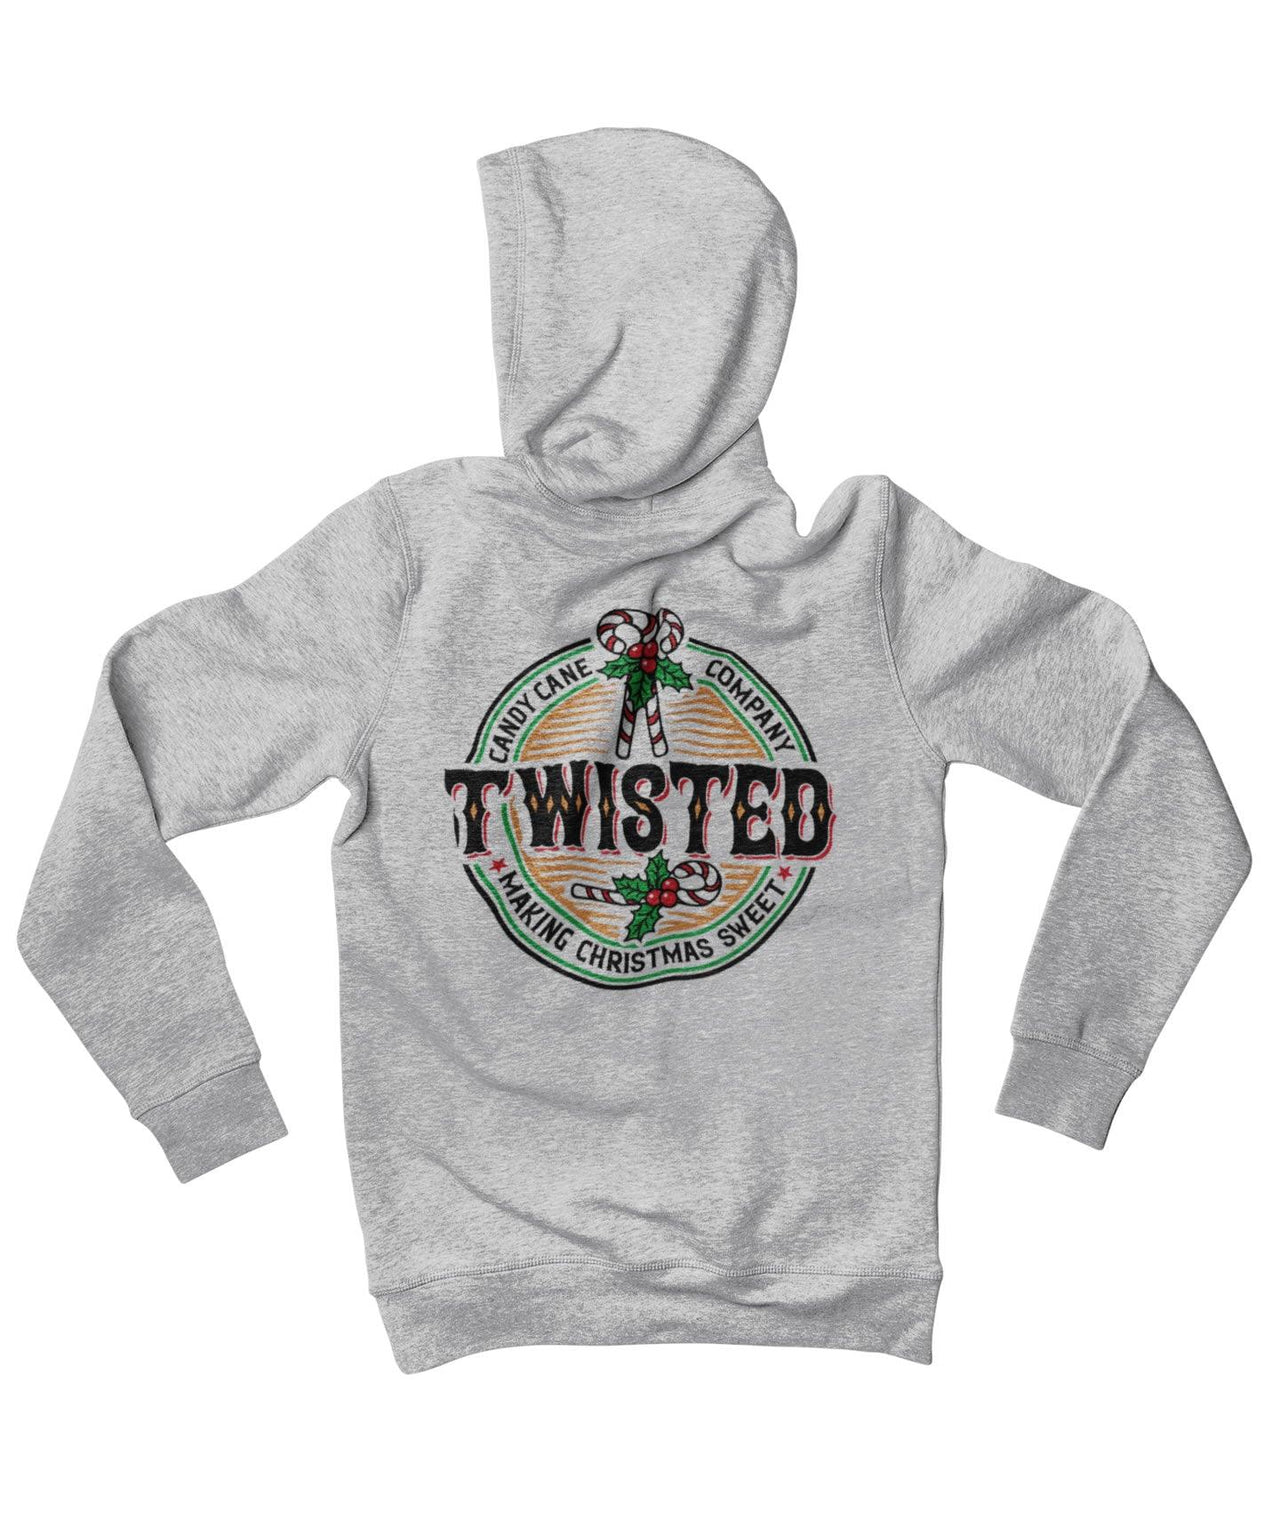 Twisted Candy Cane Colour Back Printed Christmas Hoodie For Men and Women 8Ball